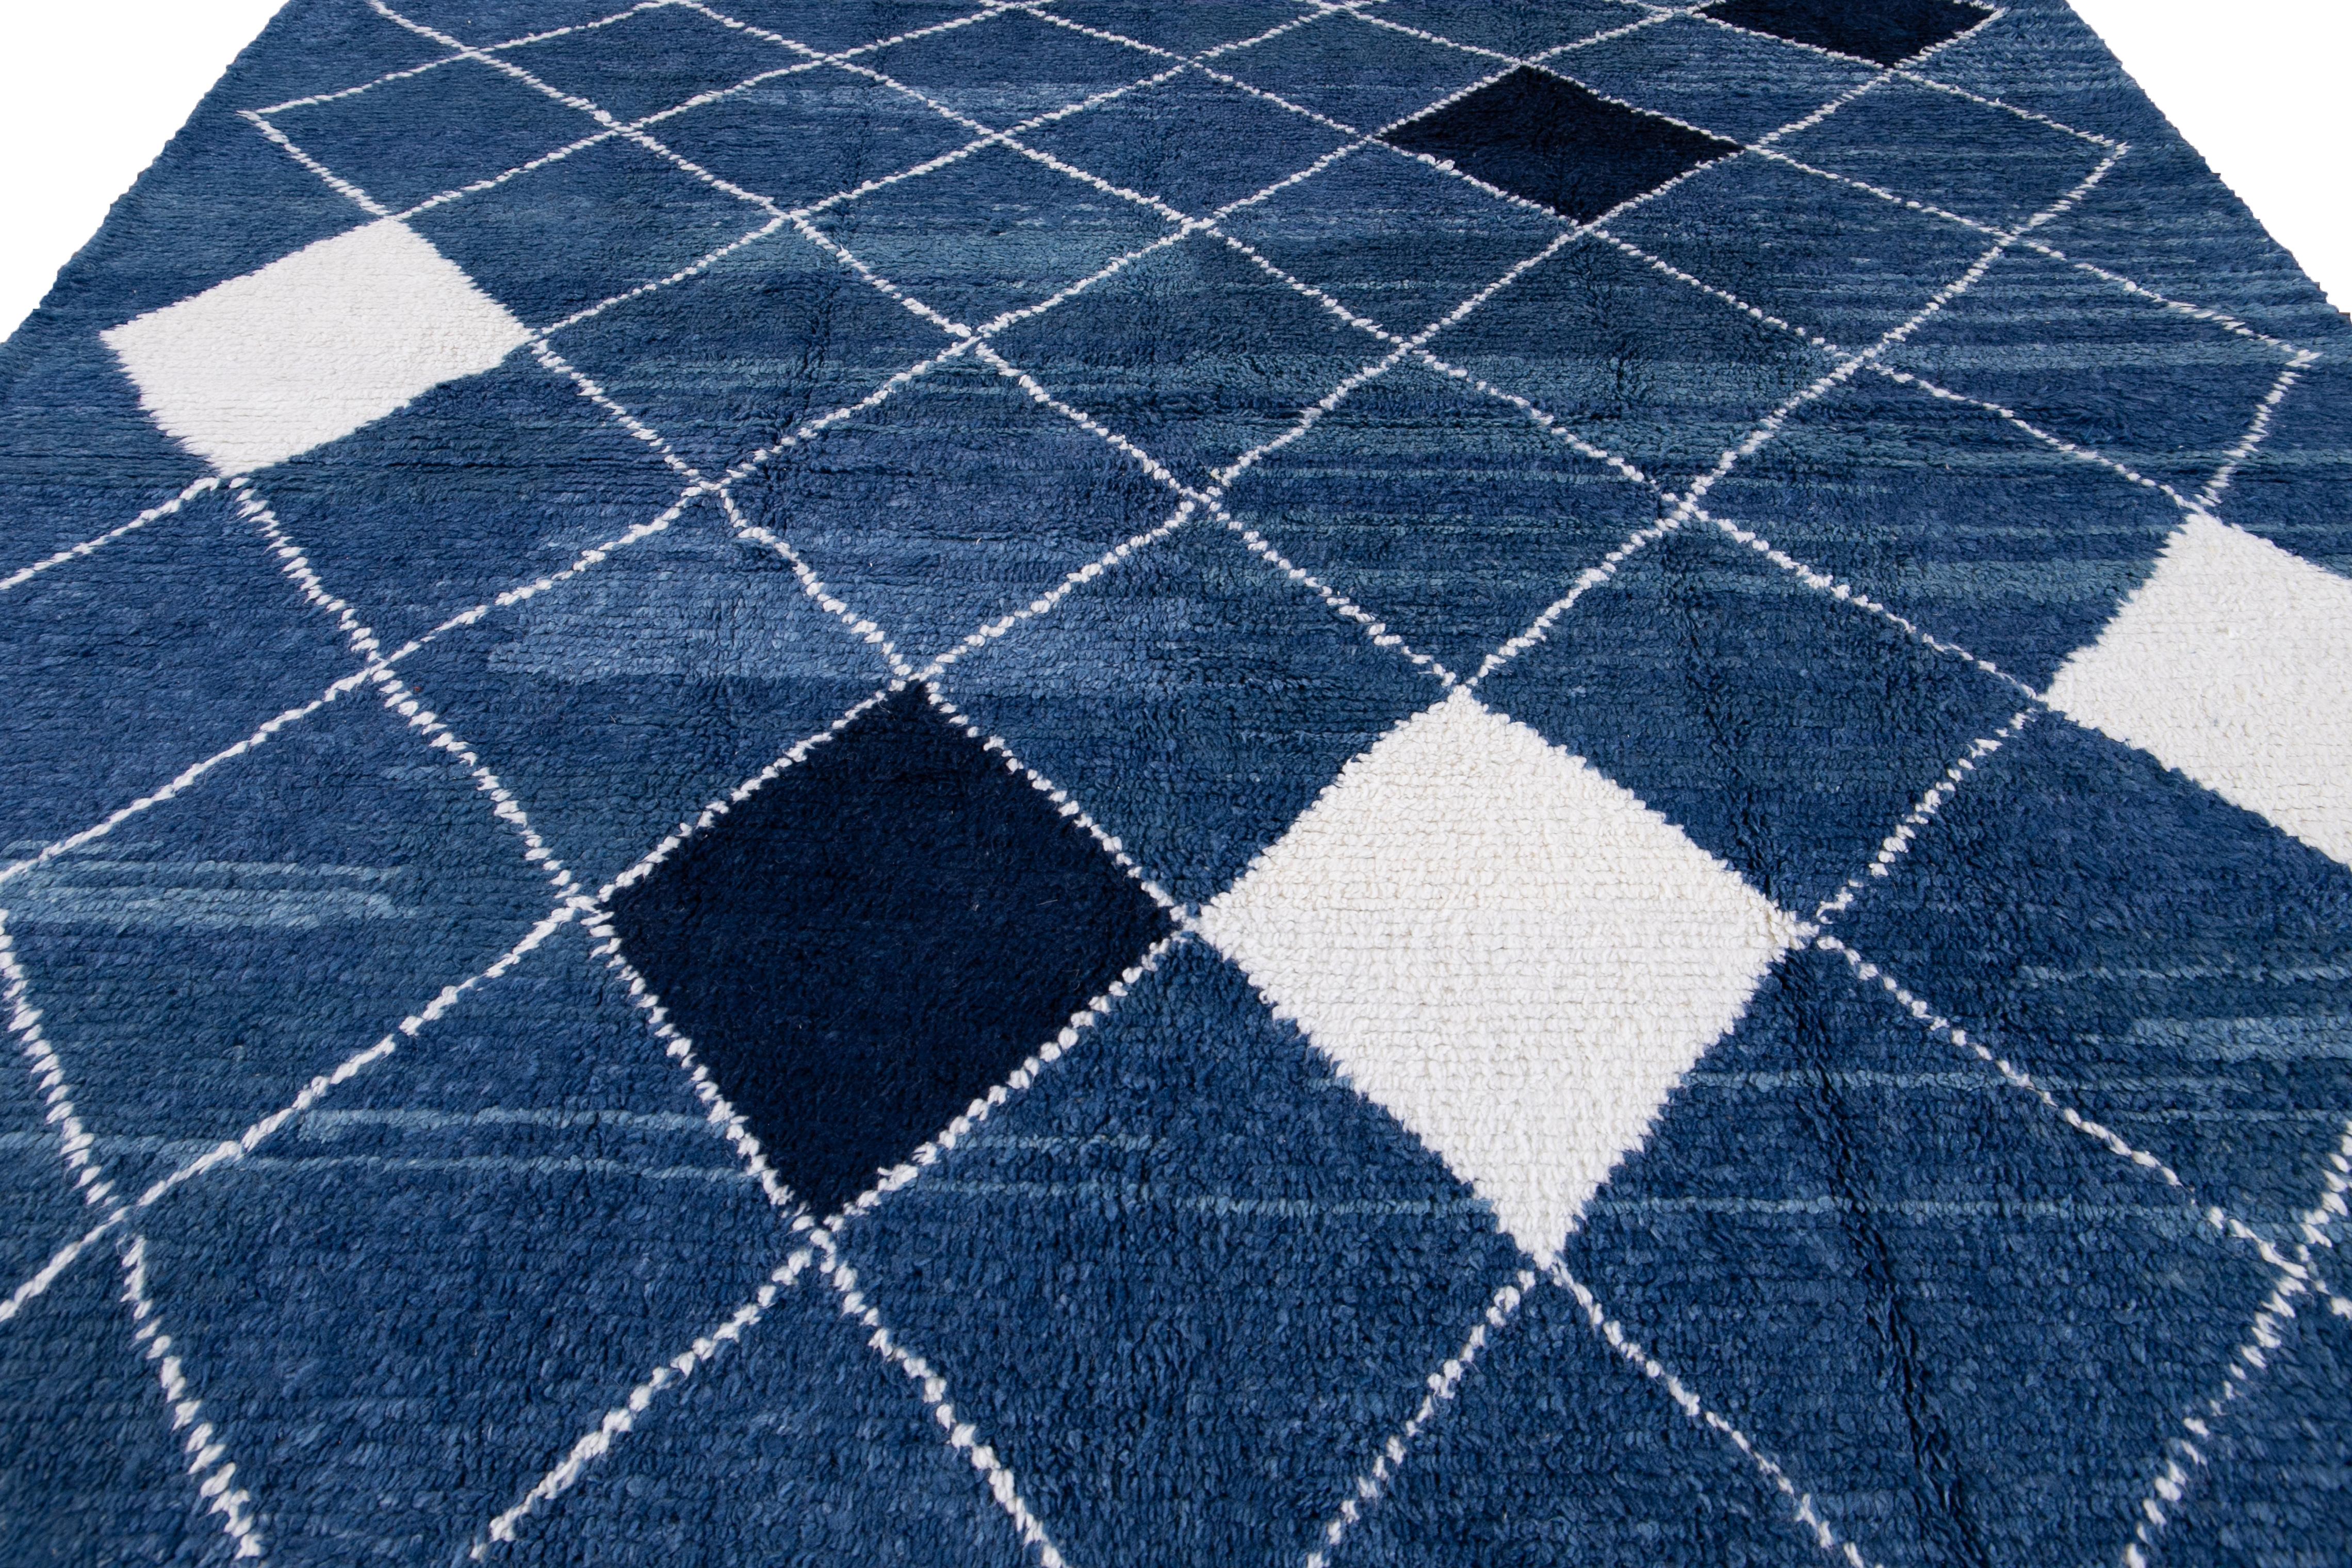 This beautiful square rug features a contemporary Moroccan style constructed from hand-knotted wool with a stunning blue field. The design includes white and black accents within a mid-century-inspired tribal pattern that will impress.

This rug